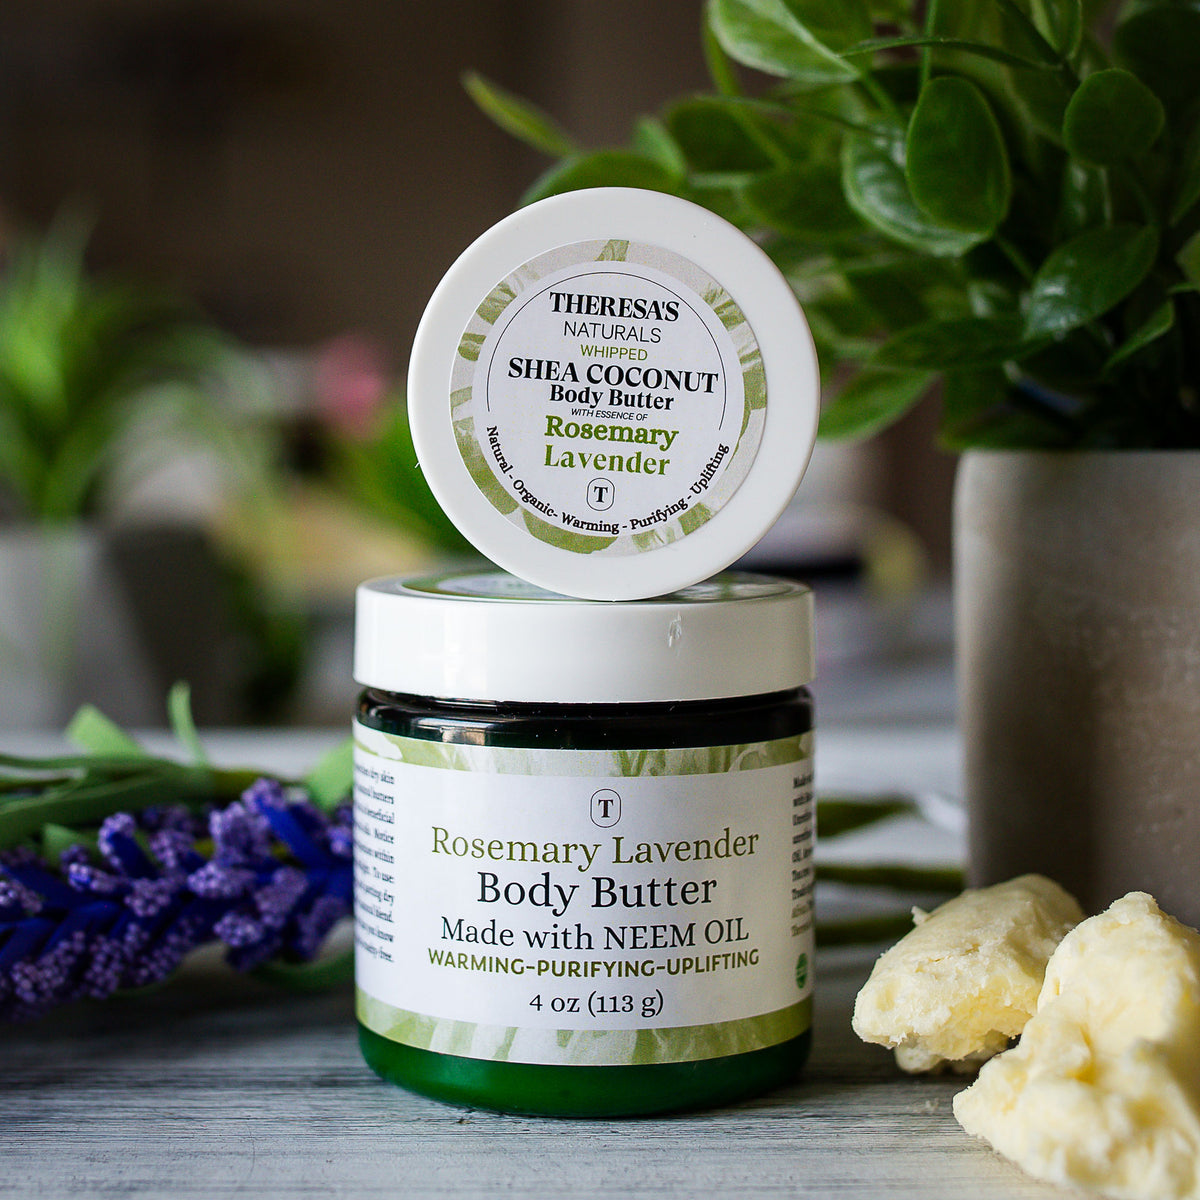 Body Butter - Rosemary Lavender | Herbal Infused | Whipped Body  Butter  | Shea Coconut Body Butter